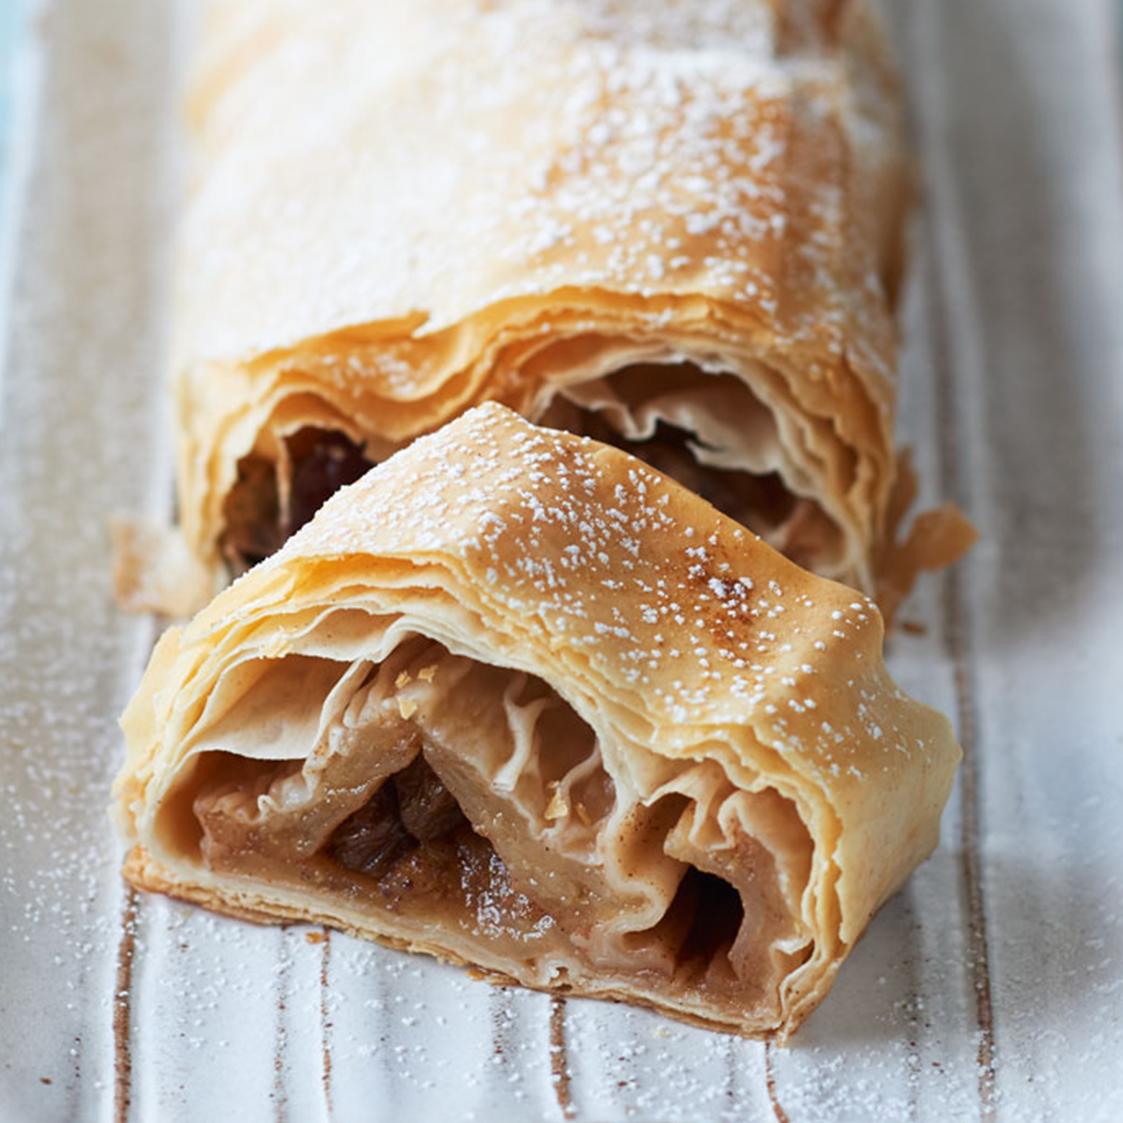  An Apple Strudel so good, it'll make you say cheers! 🍎🇬🇧